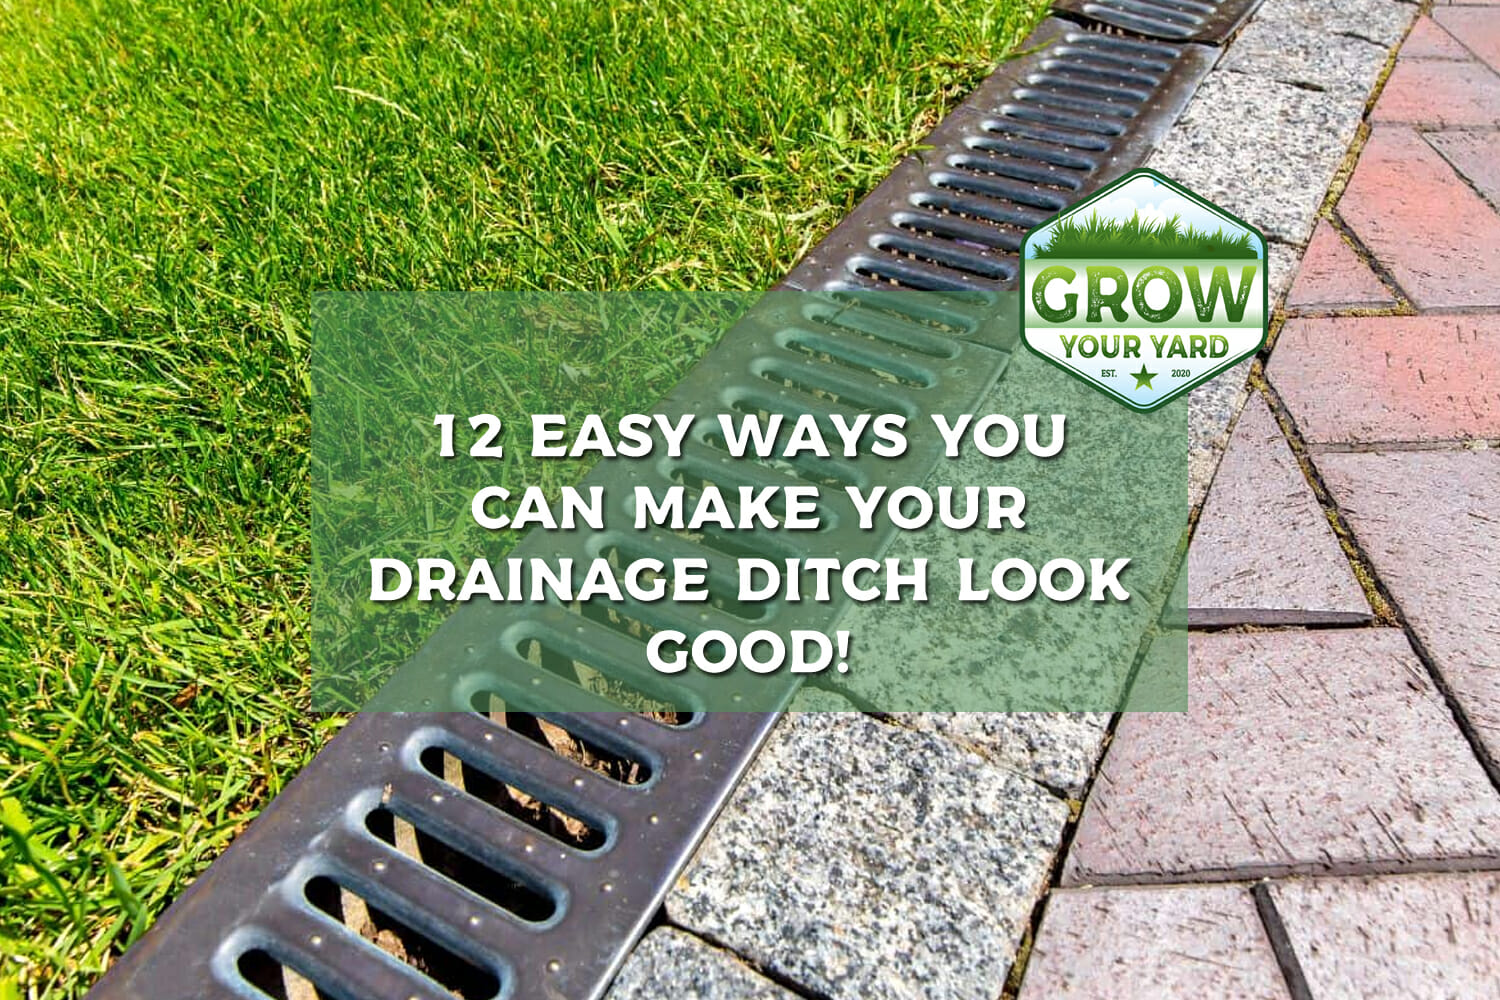 12 Easy Ways You Can Make a Drainage Ditch Look Good!